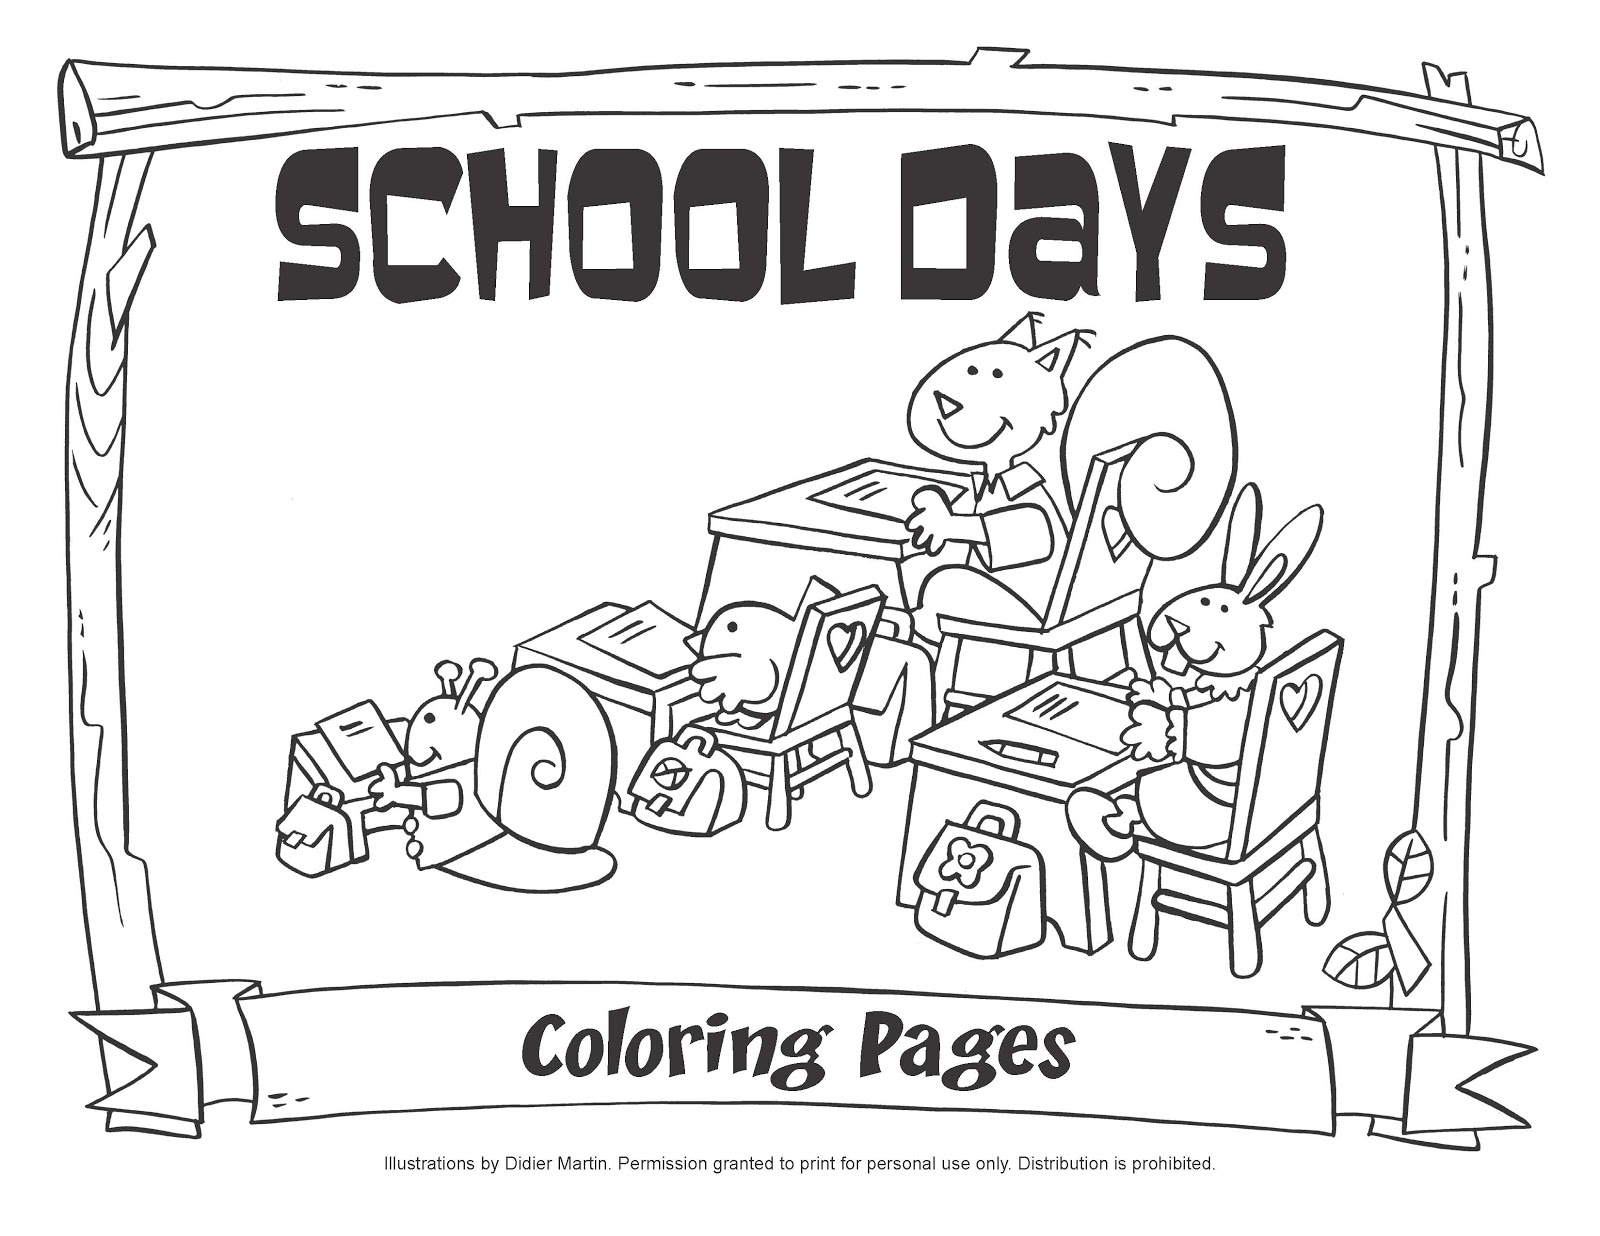  School House coloring pages, Coloring for kids, School Day